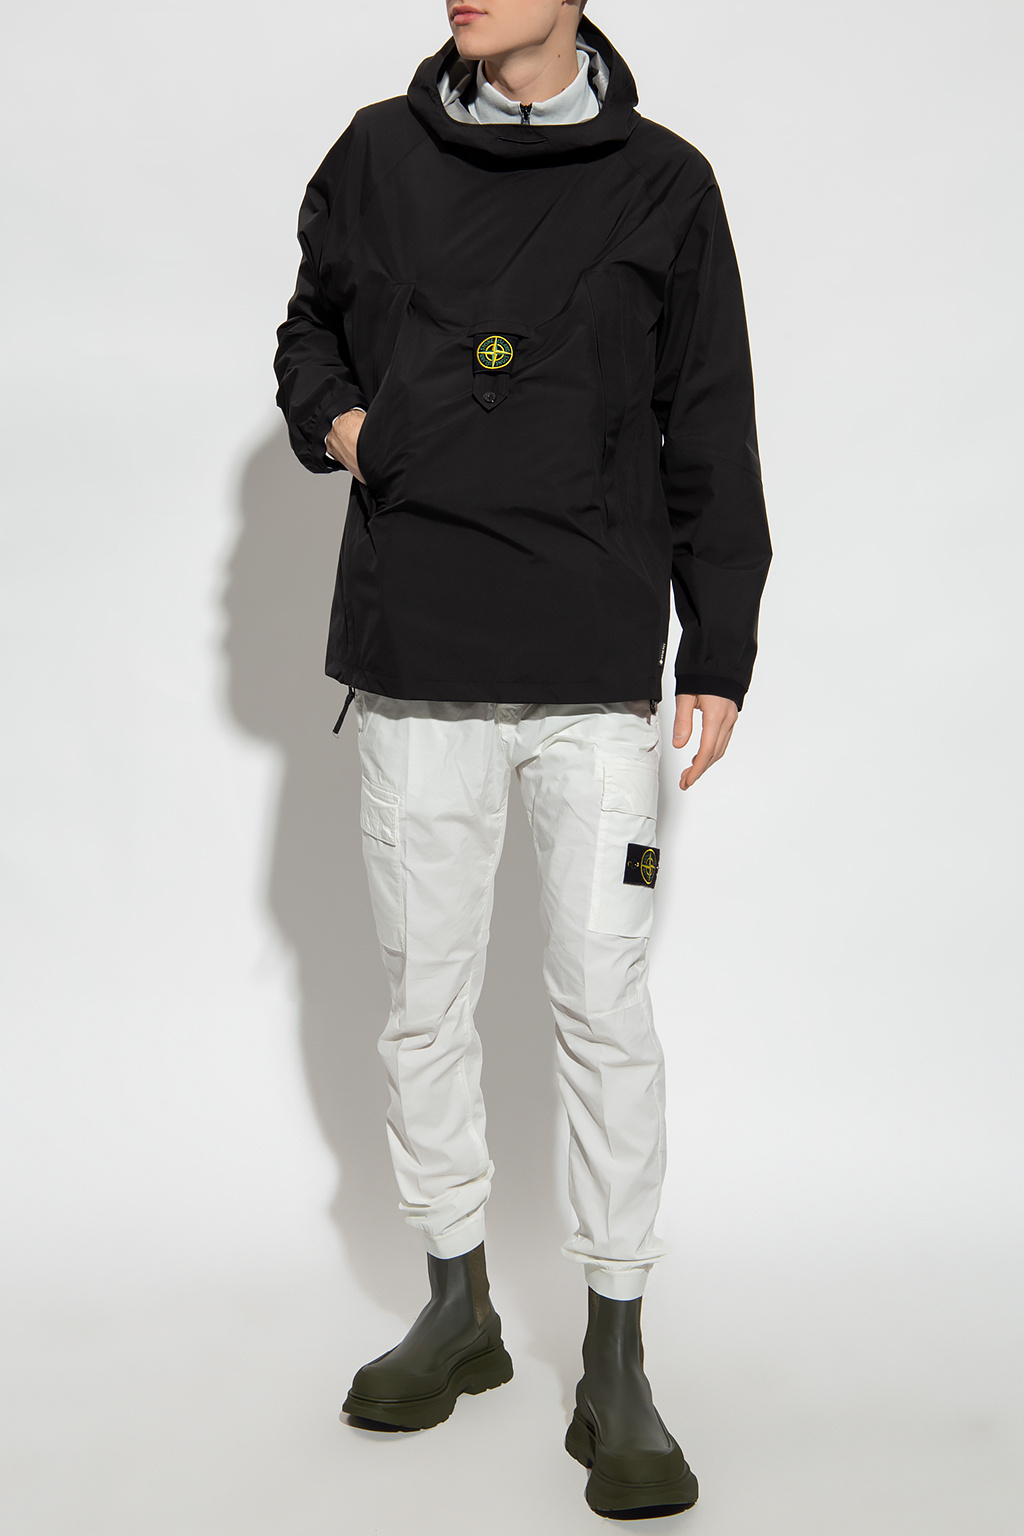 Stone Island FRED PERRY Very Perry logo T-shirt